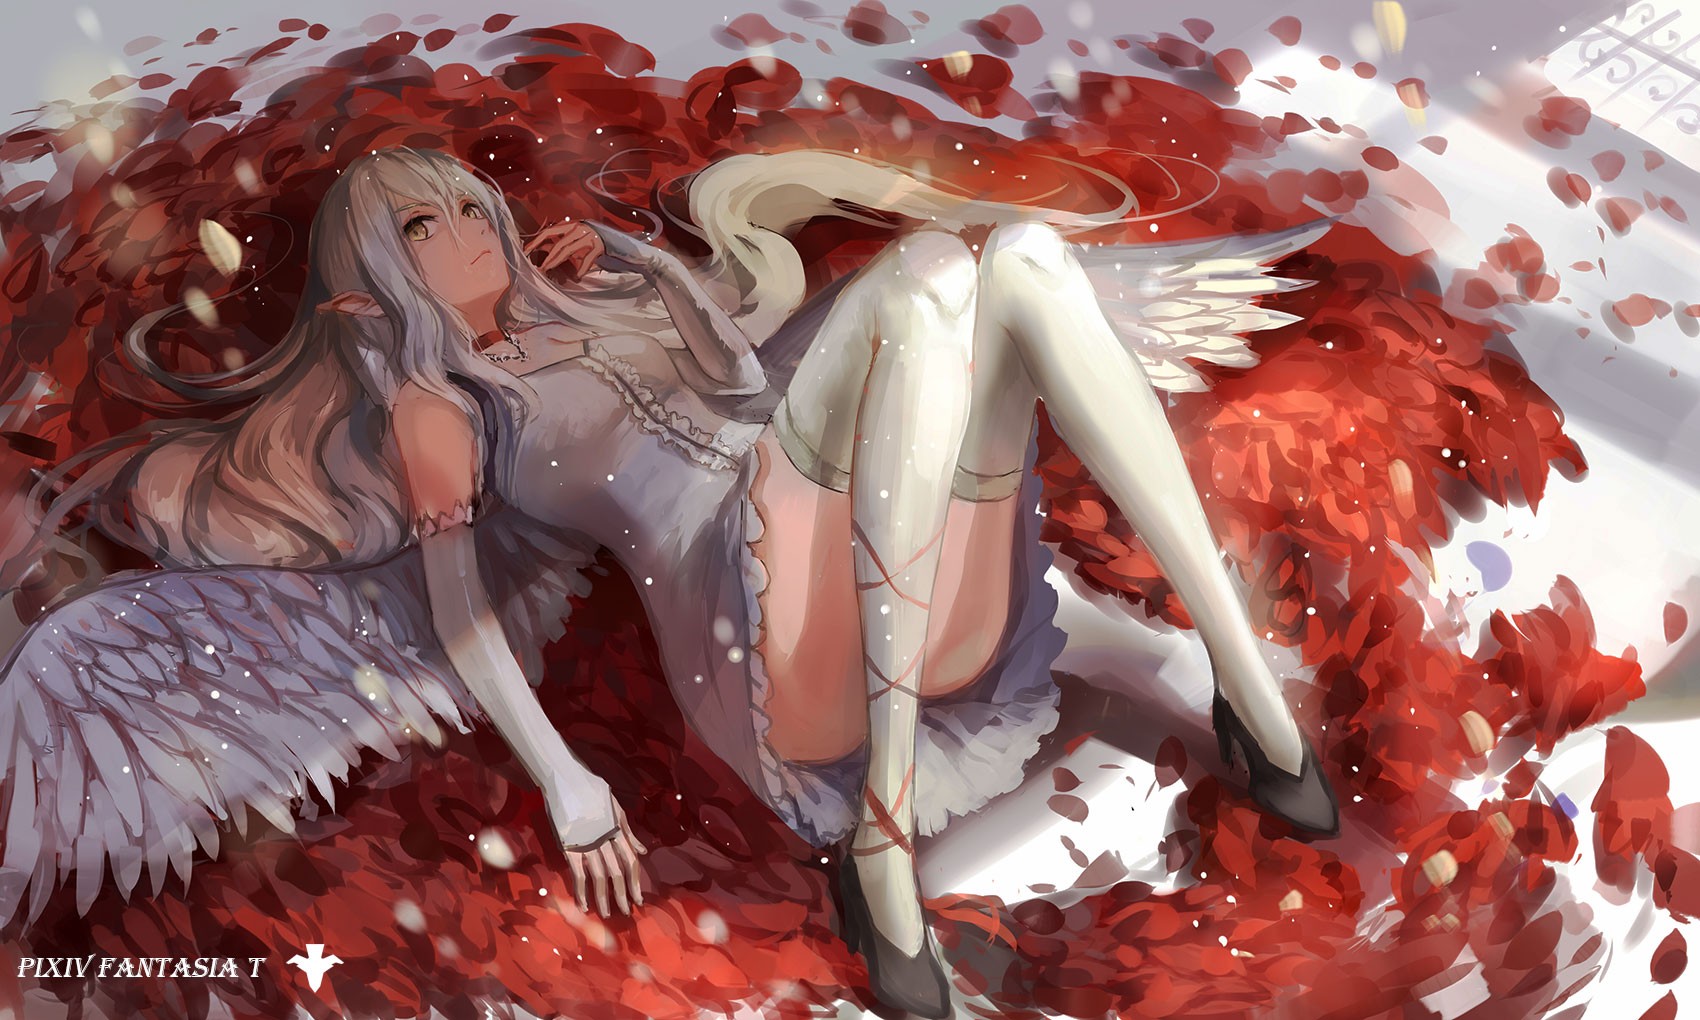 Anime 1700x1020 anime girls Pixiv Fantasia wings thigh-highs dress angel arm warmers detached sleeves legs thighs fantasy art fantasy girl Pixiv women long hair stockings white stockings pointy ears blonde